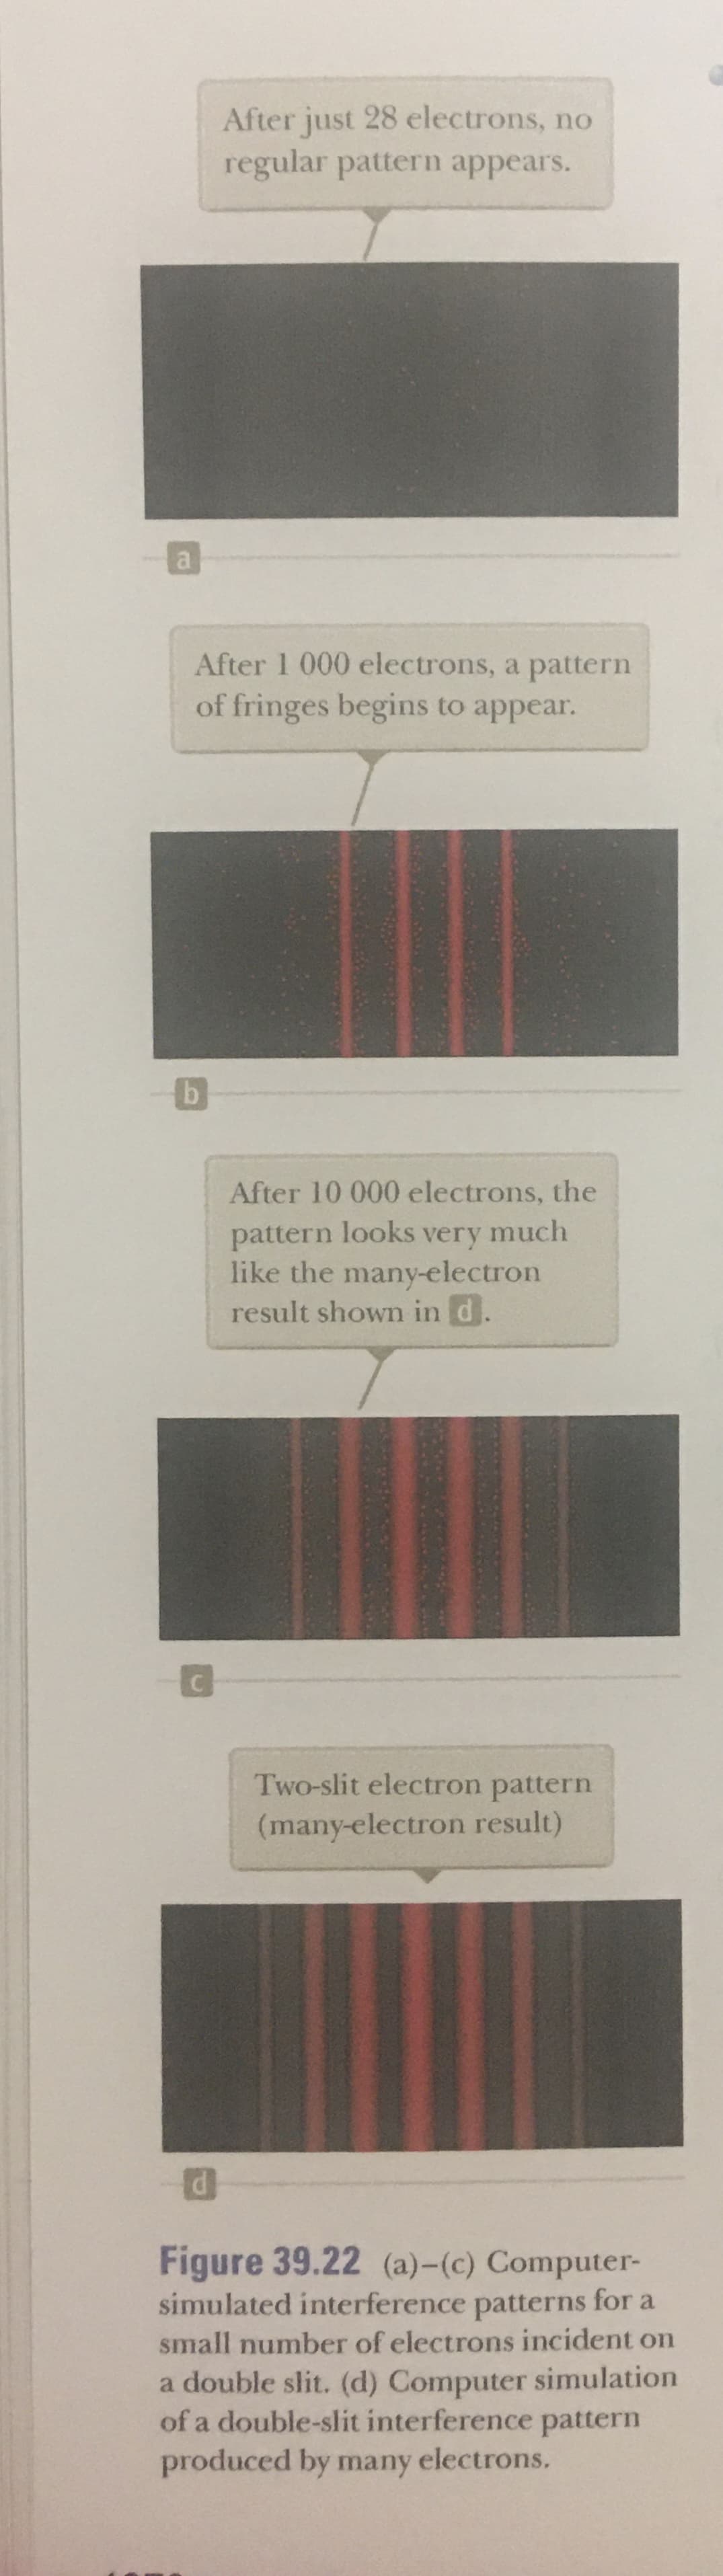 After just 28 electrons, no
regular pattern appears.
a
After 1 000 electrons, a pattern
of fringes begins to appear.
b
After 10 000 electrons, the
pattern looks very much
like the many-electron
result shown in d.
C
Two-slit electron pattern
(many-electron result)
Figure 39.22 (a)-(c) Computer-
simulated interference patterns for a
small number of electrons incident on
a double slit. (d) Computer simulation
of a double-slit interference pattern
produced by many
electrons.
